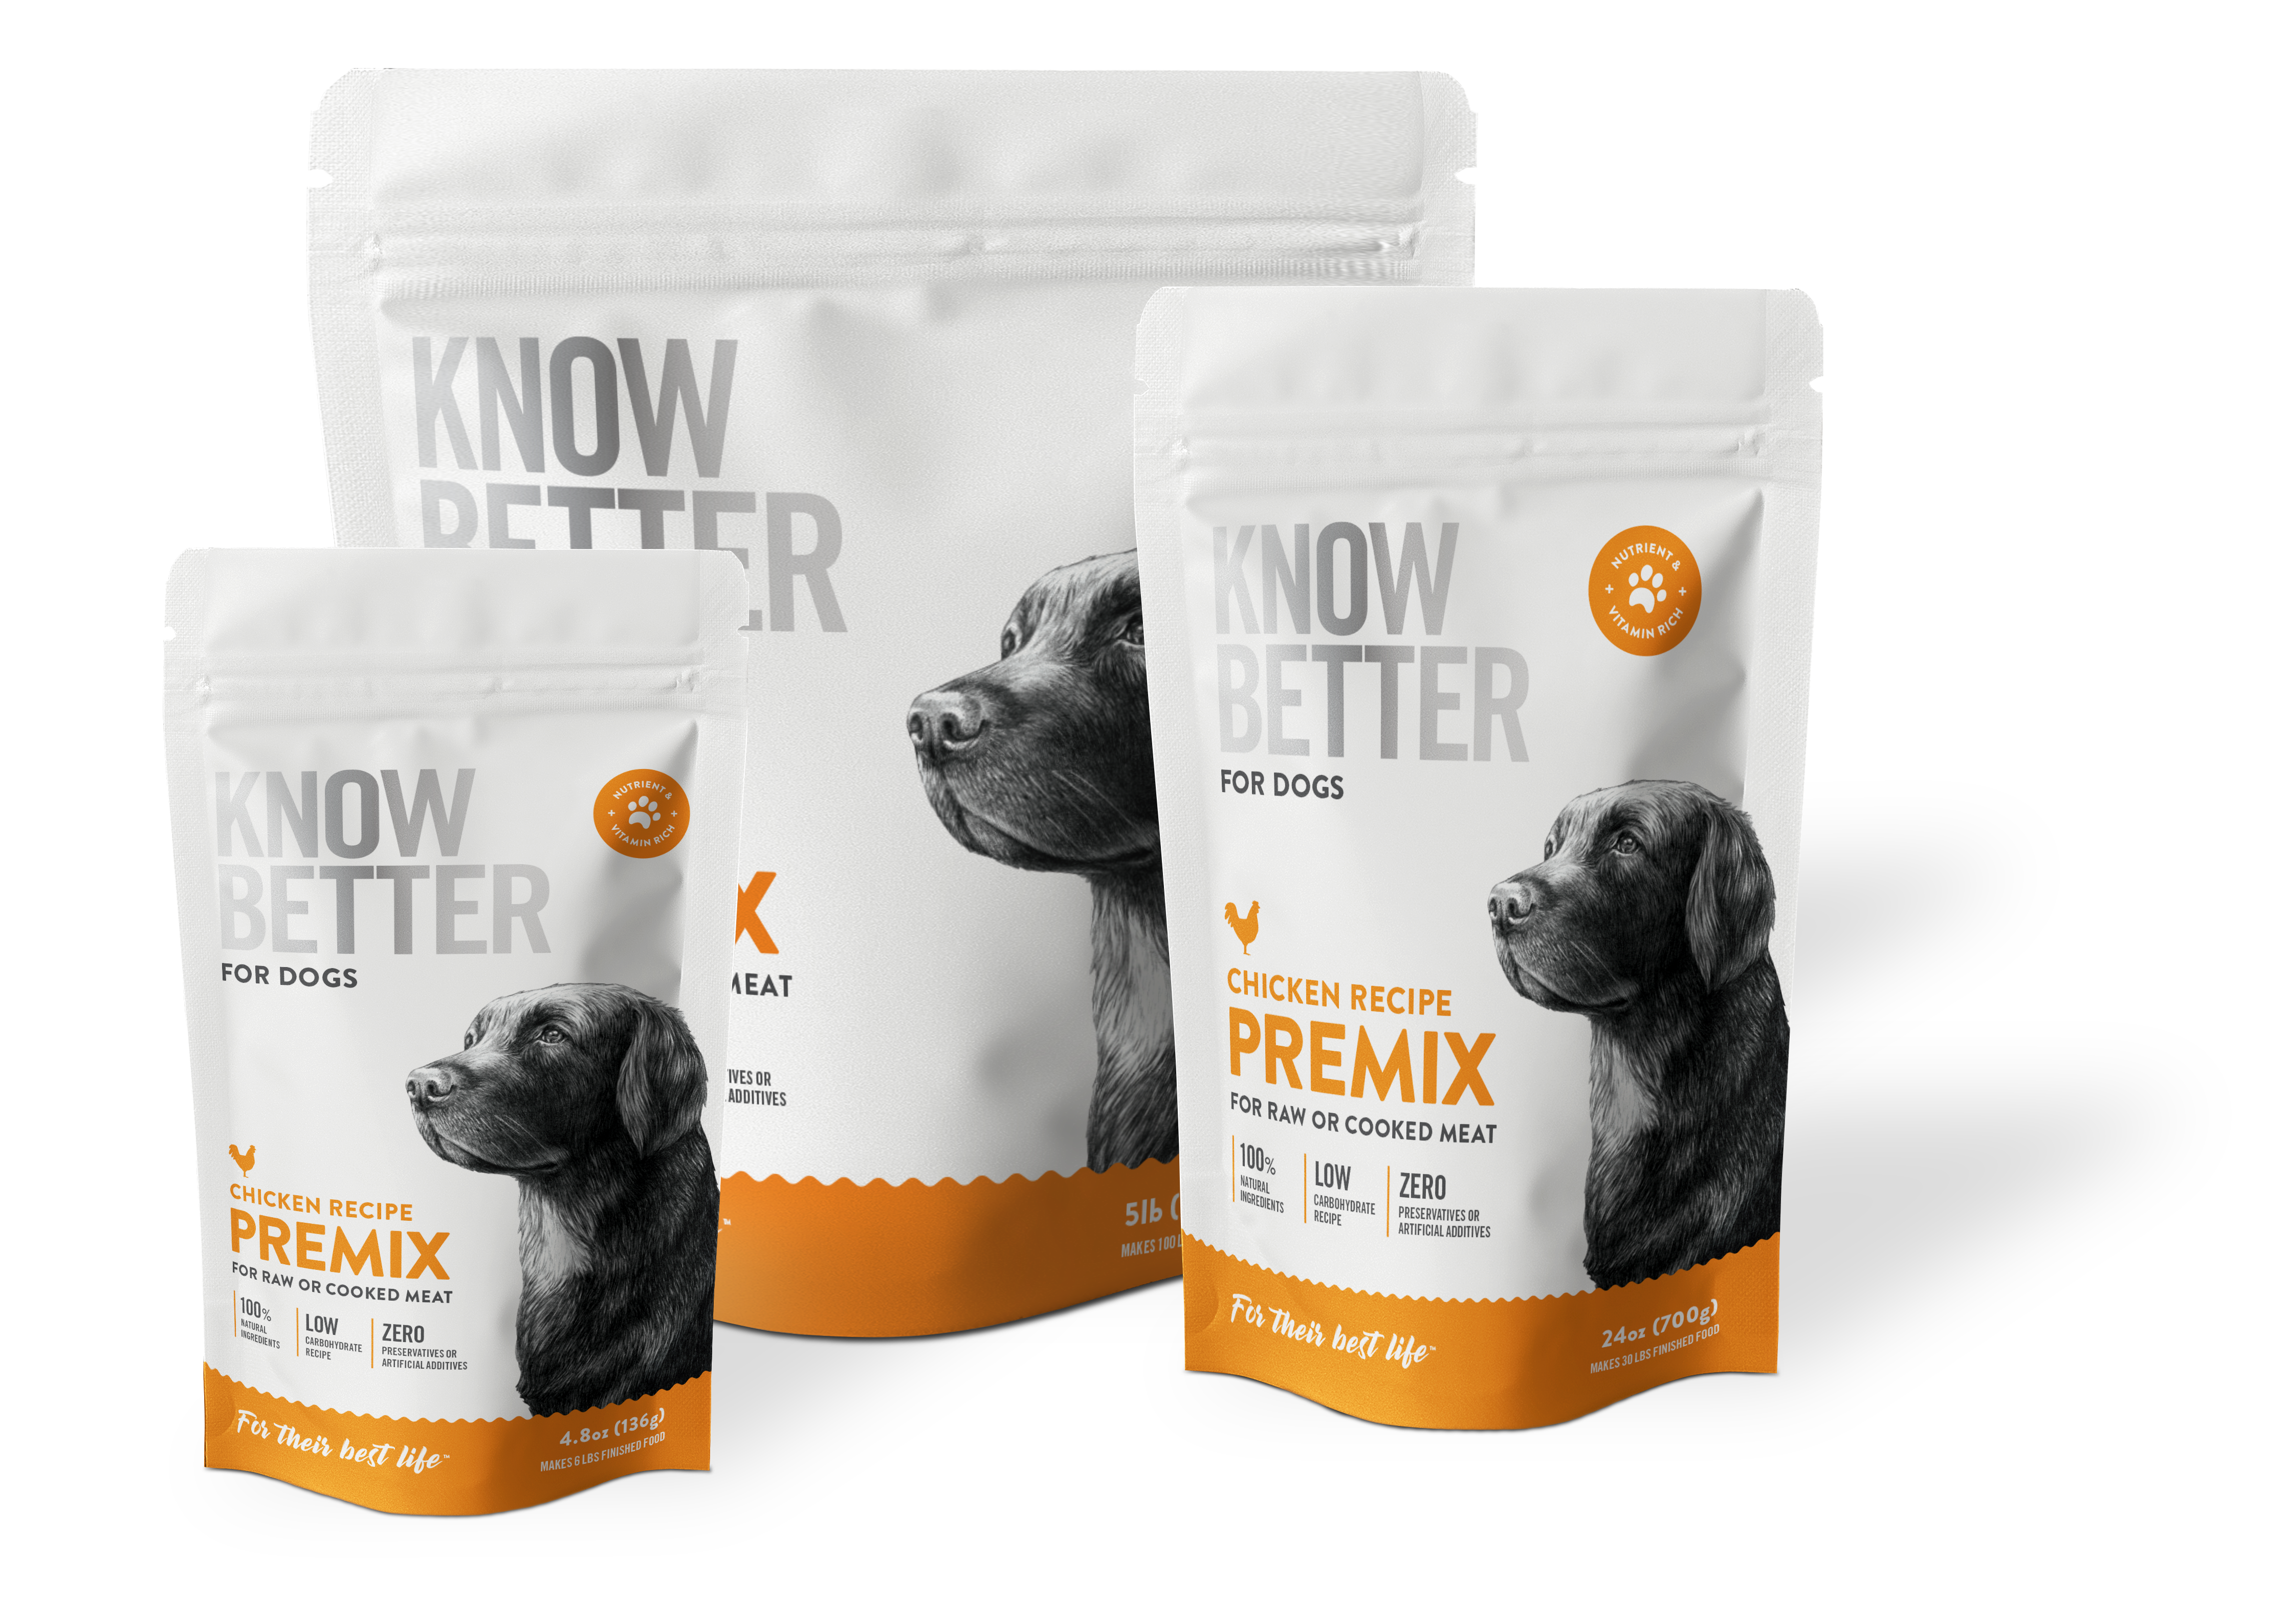 Know Better for Dogs - For Making Healthy Homemade Dog Food